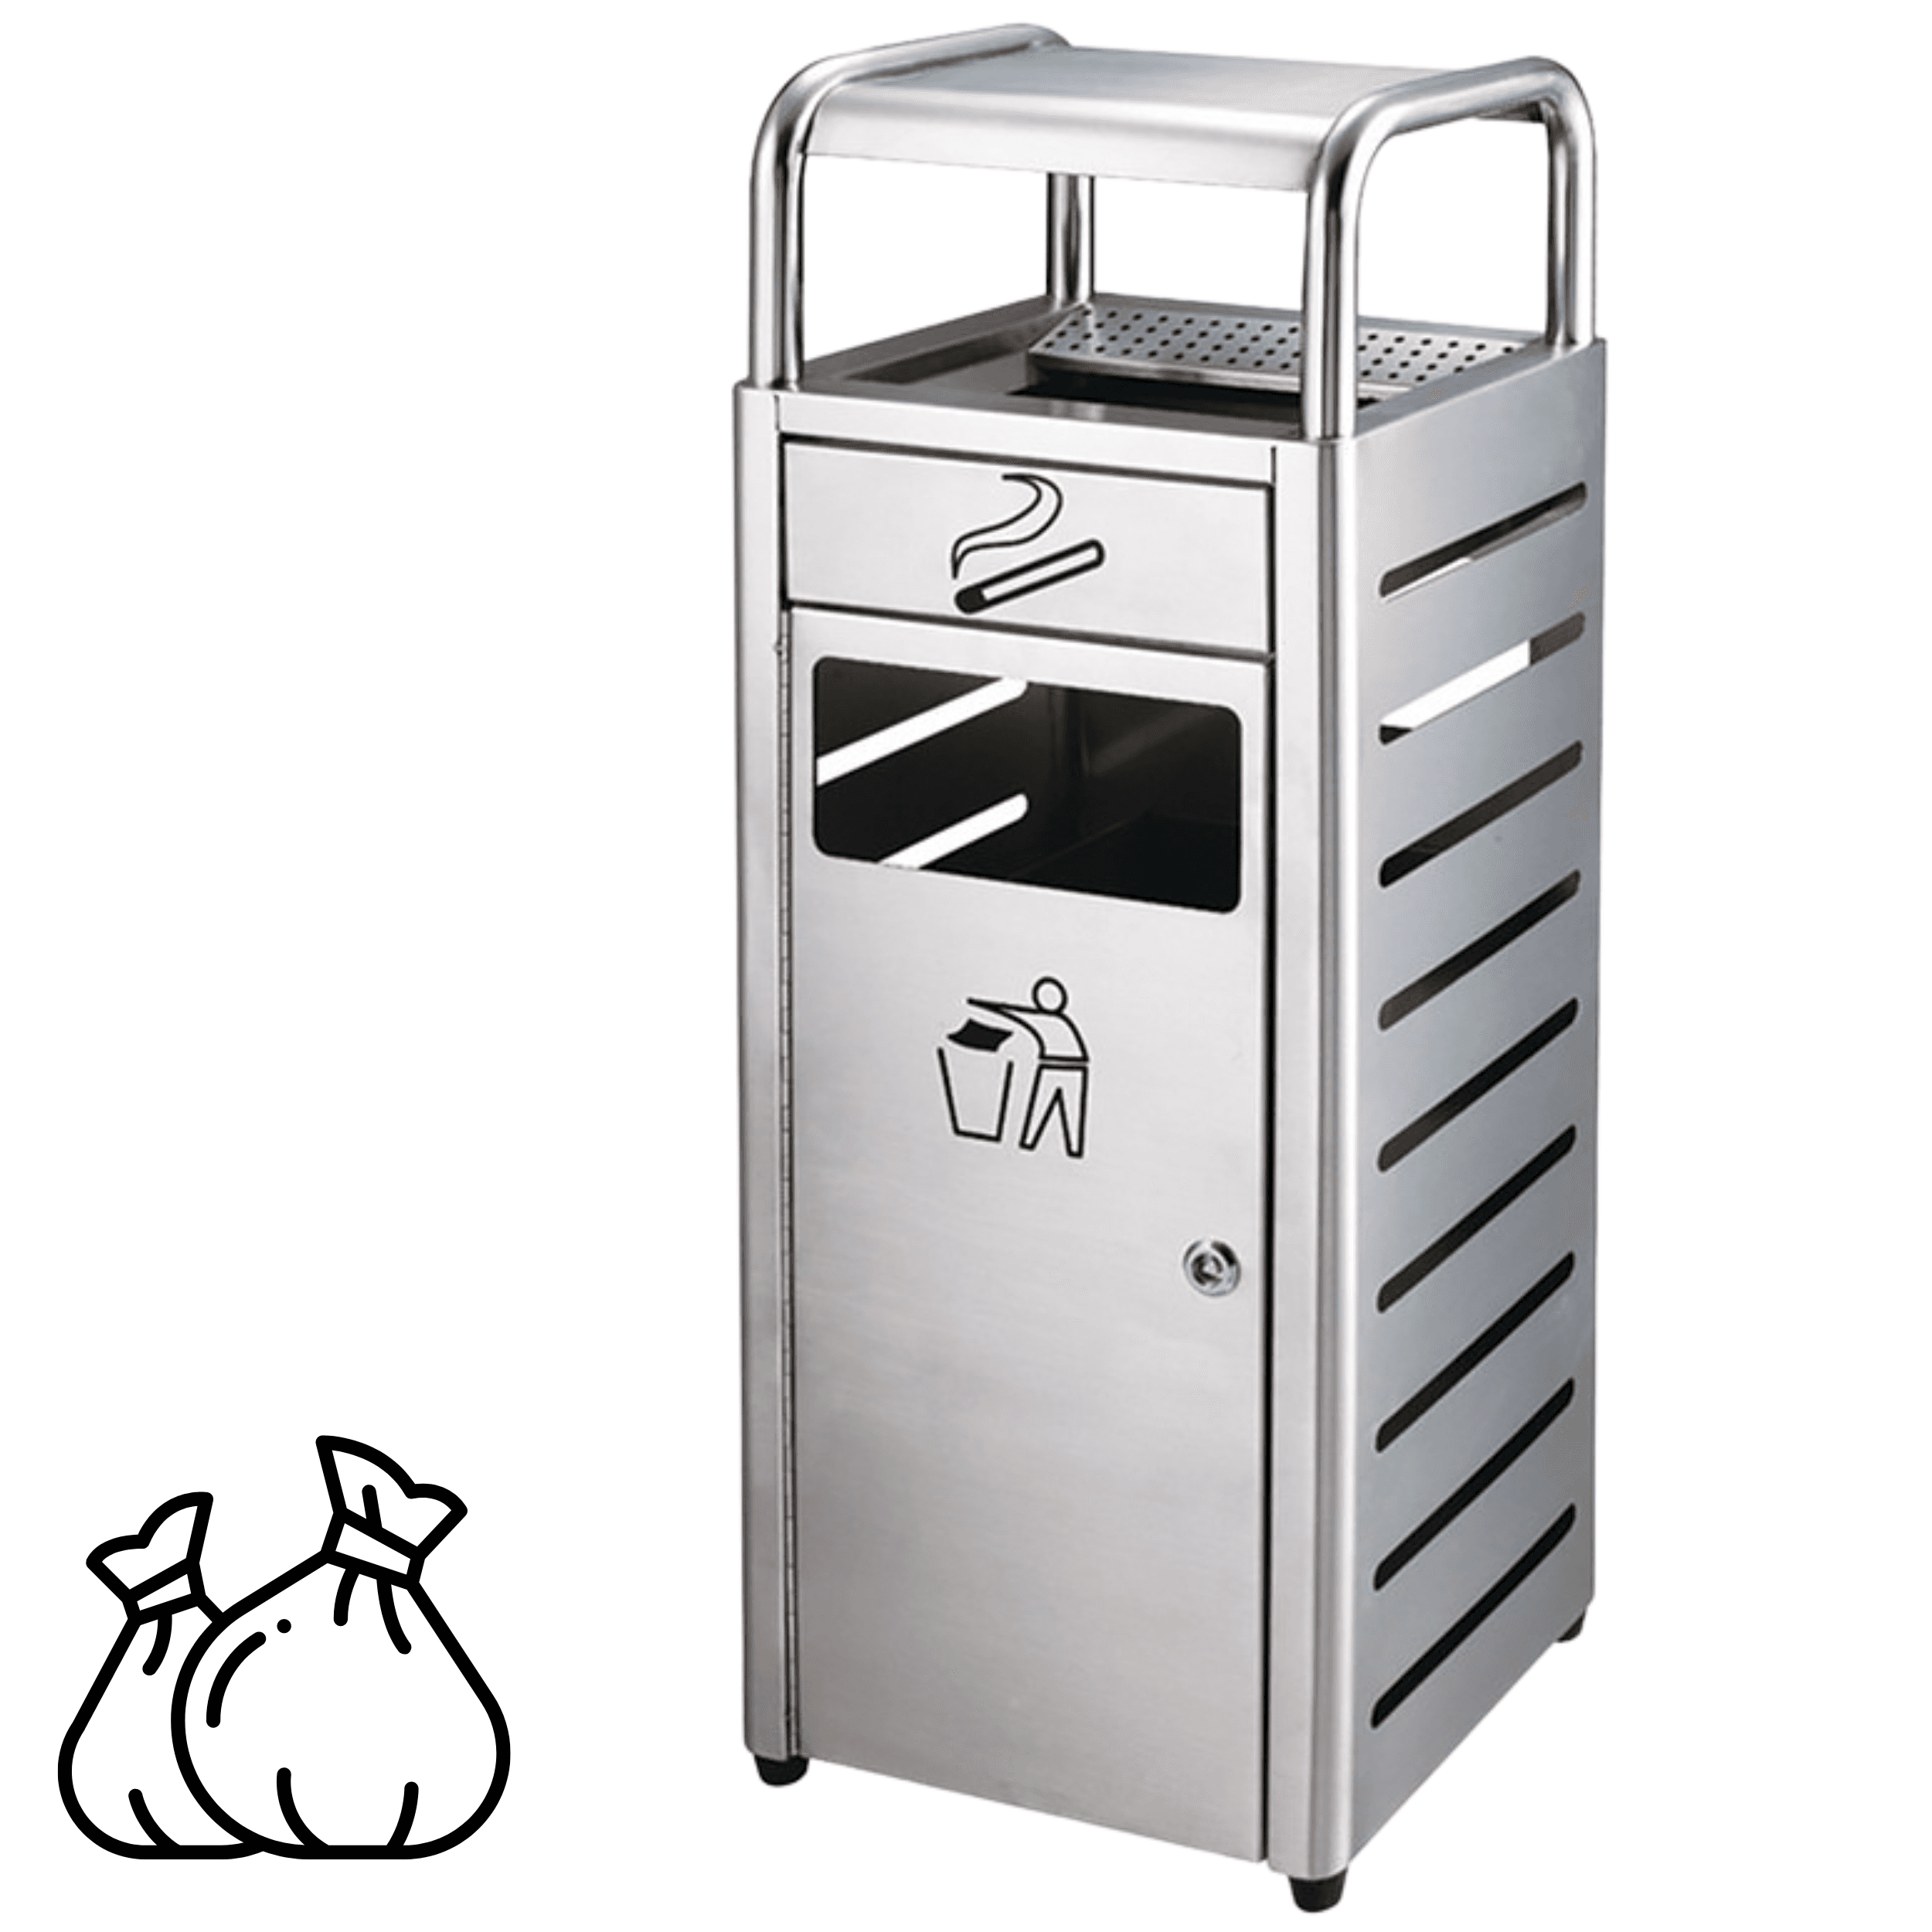 Litter bin with ashtray - silver